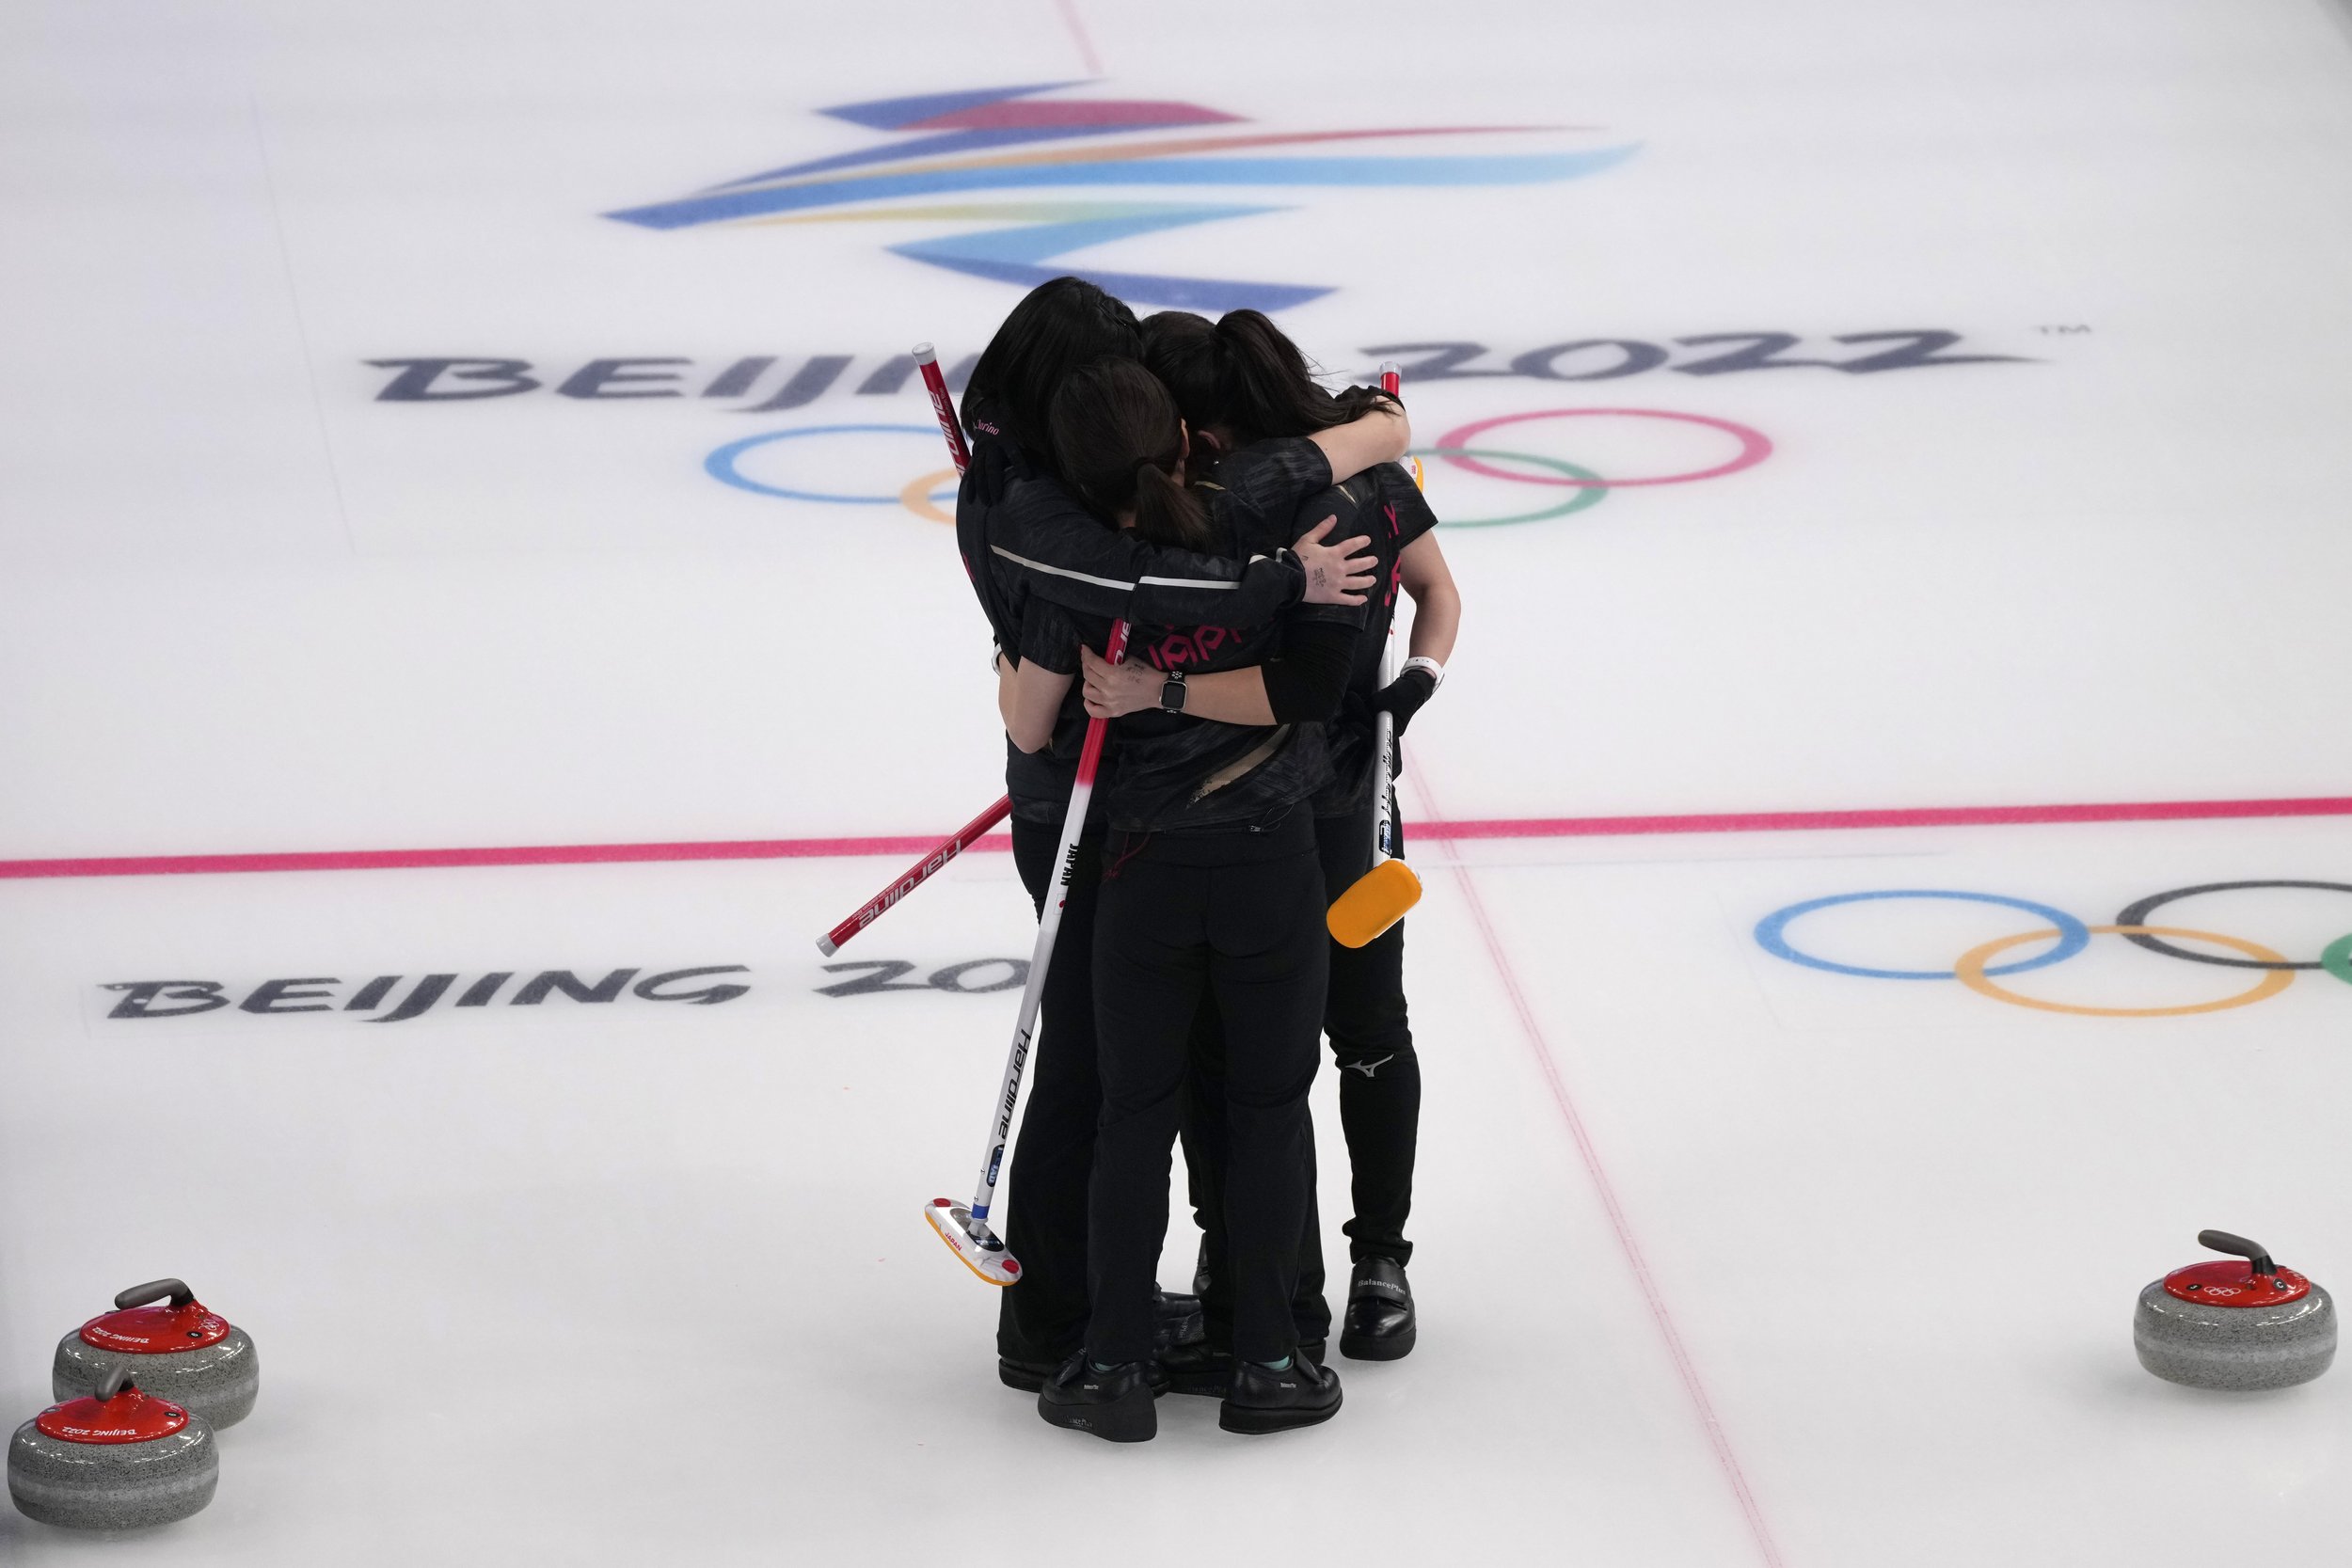  Japan's athletes celebrate after winning the women's curling semifinal match between Japan and Switzerland at the Beijing Winter Olympics Friday, Feb. 18, 2022, in Beijing. (AP Photo/Nariman El-Mofty) 